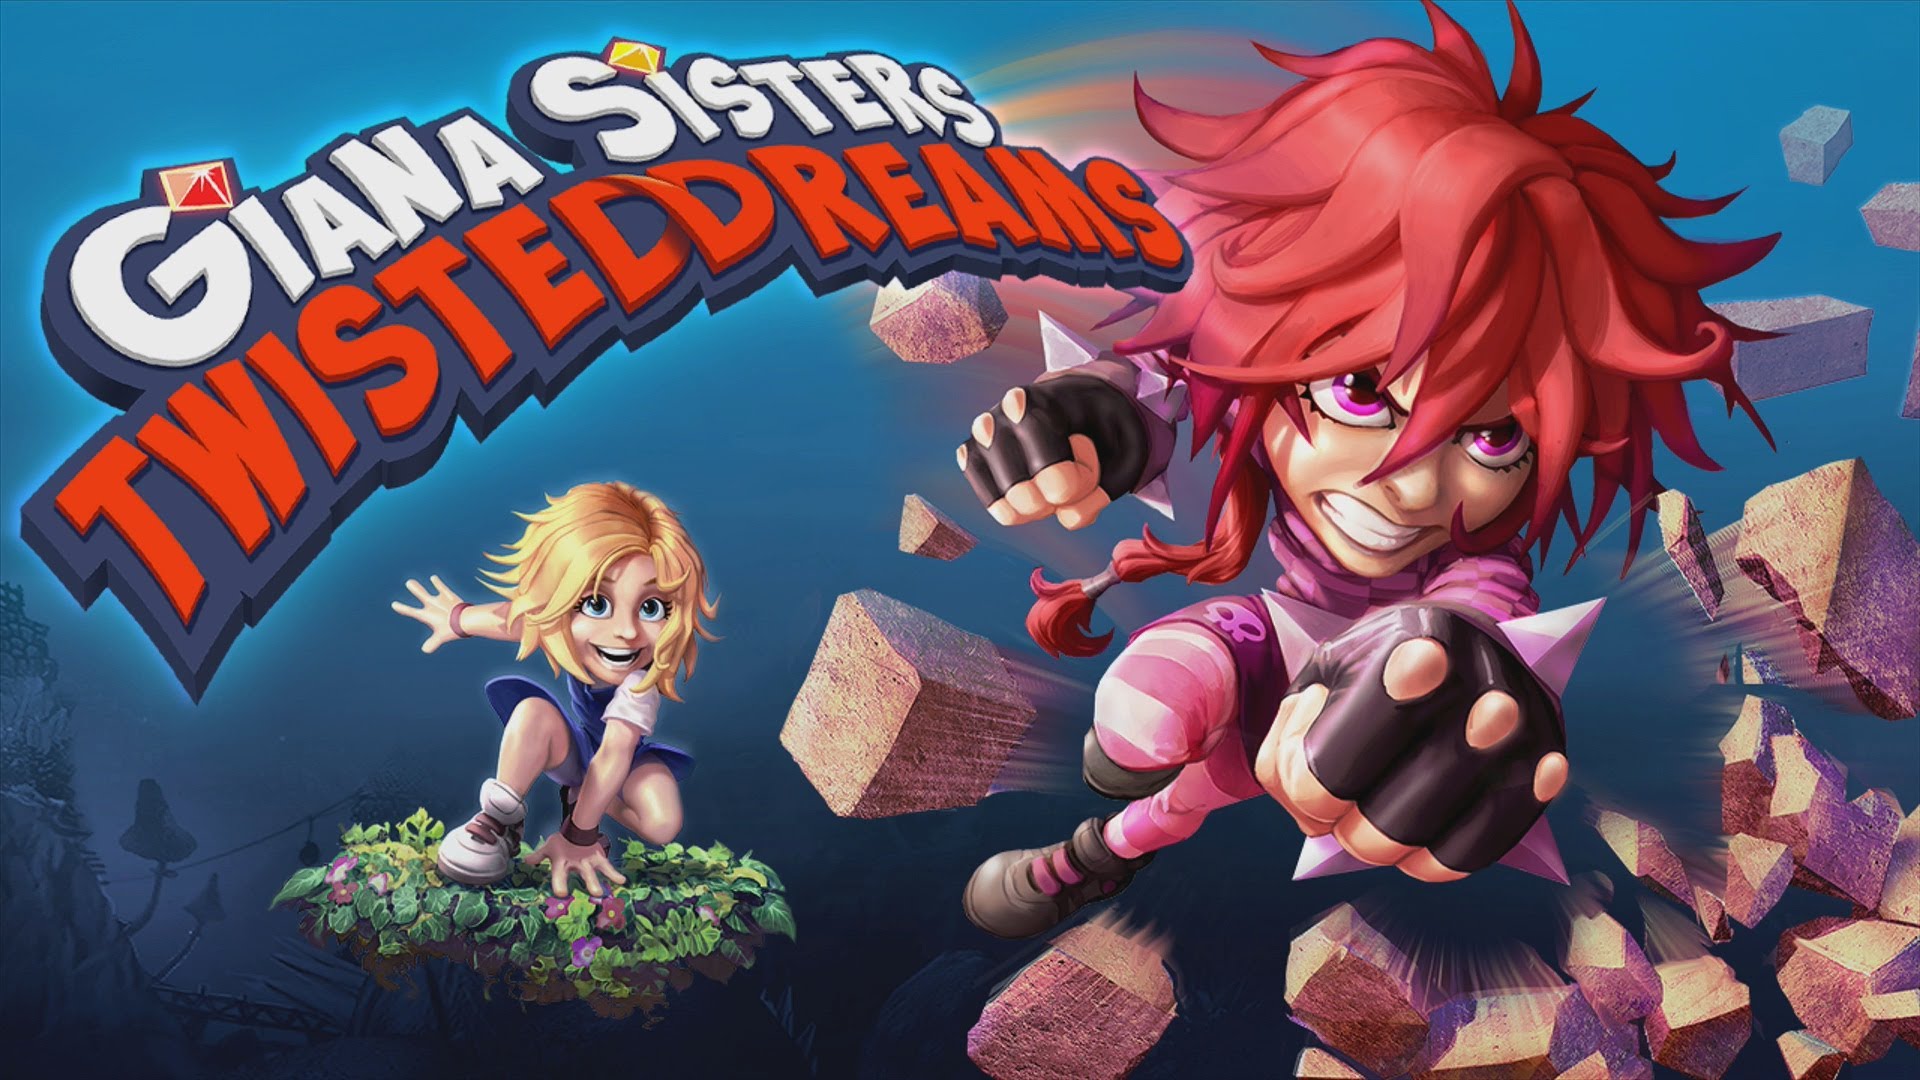 Giana Sisters: Twisted Dreams Backgrounds, Compatible - PC, Mobile, Gadgets| 1920x1080 px